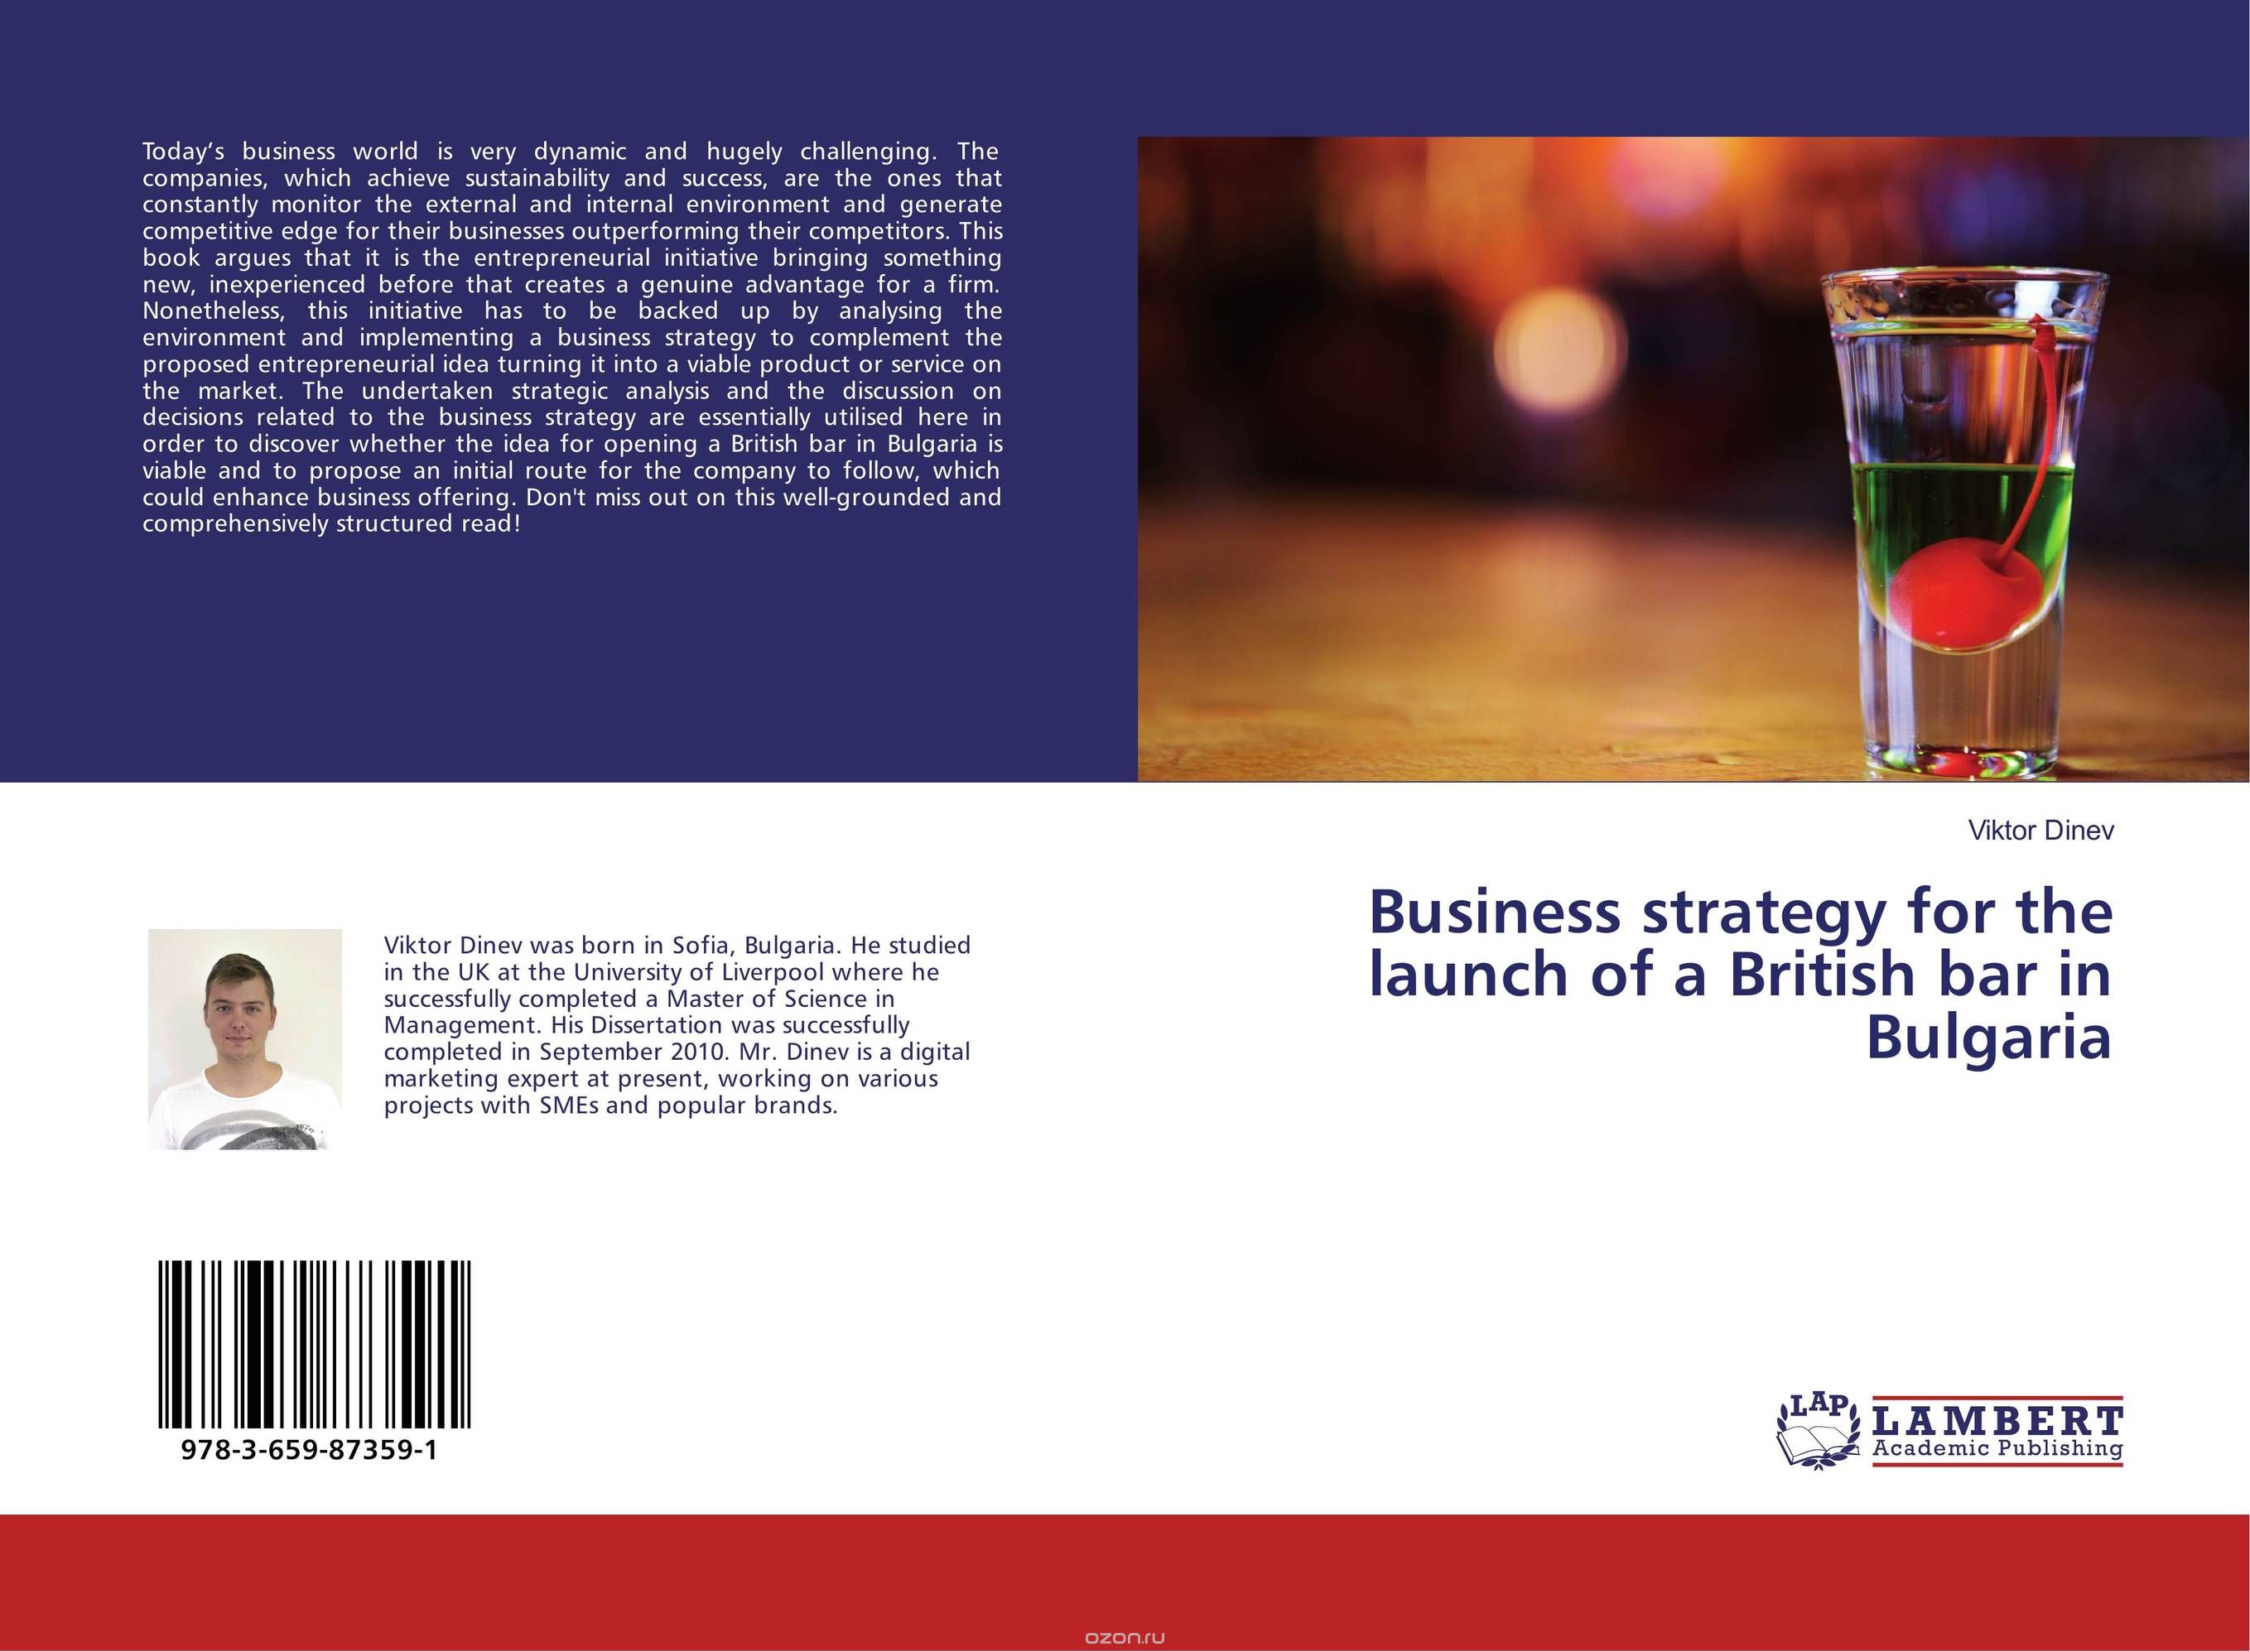 Скачать книгу "Business strategy for the launch of a British bar in Bulgaria"